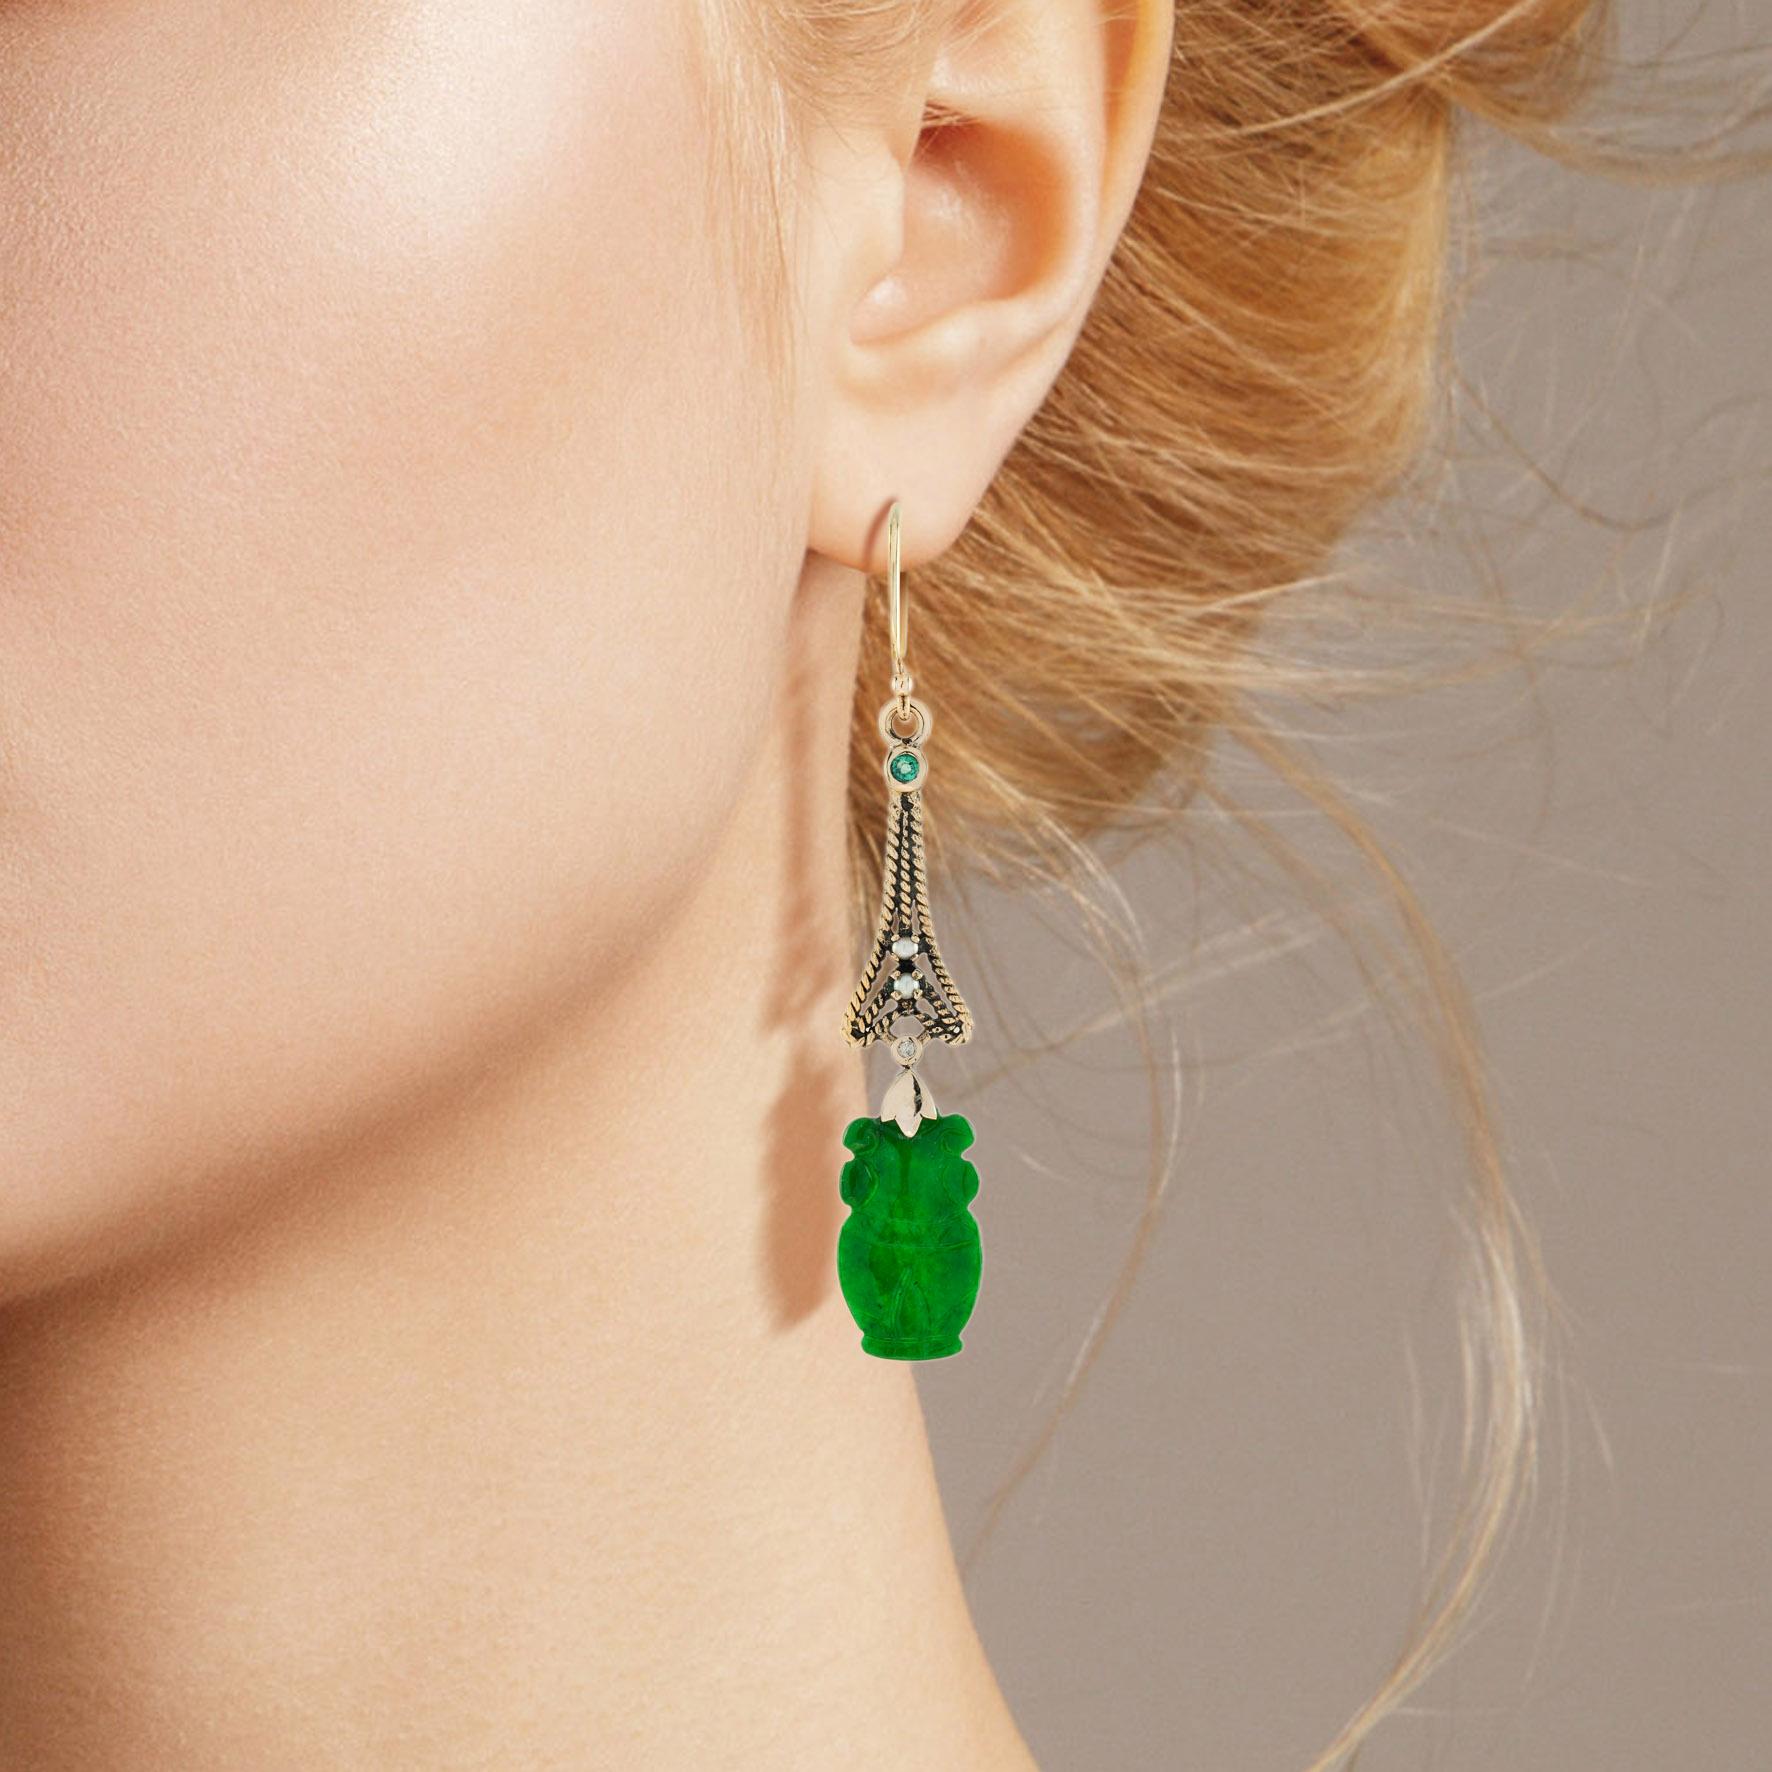 The natural jade in these lovely earrings has some very special shape. Both pieces have a strong green color and well vase carvings. The jade is suspended in a 9k yellow gold setting with pearl, diamond, and emerald geometric link on the top. The